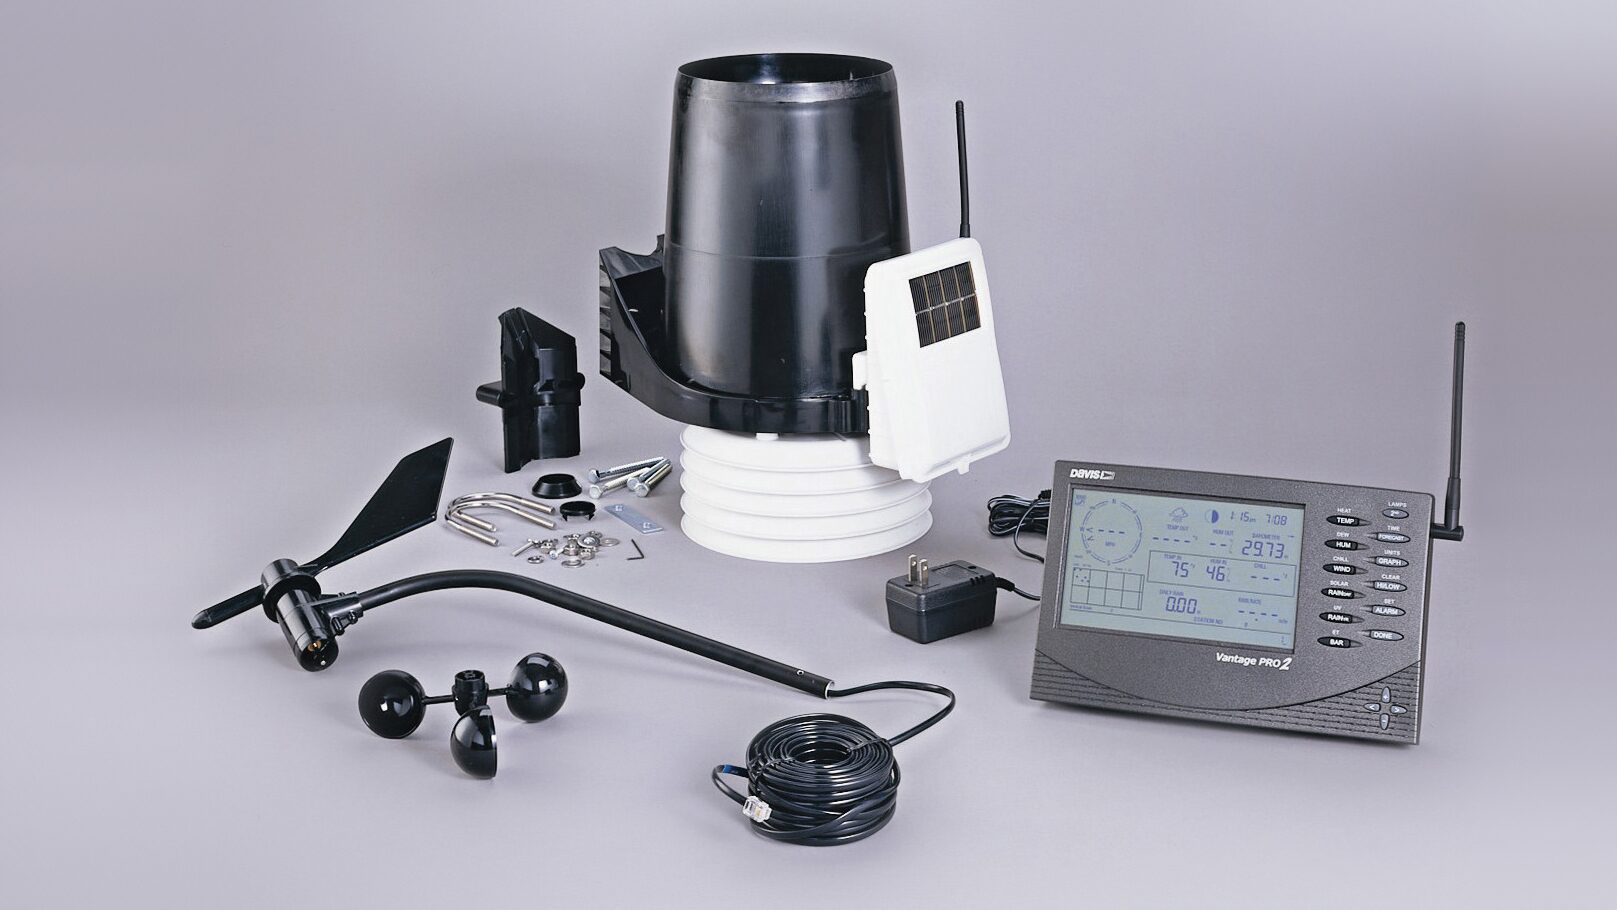 A table with various items including a radio, headphones and a monitor.